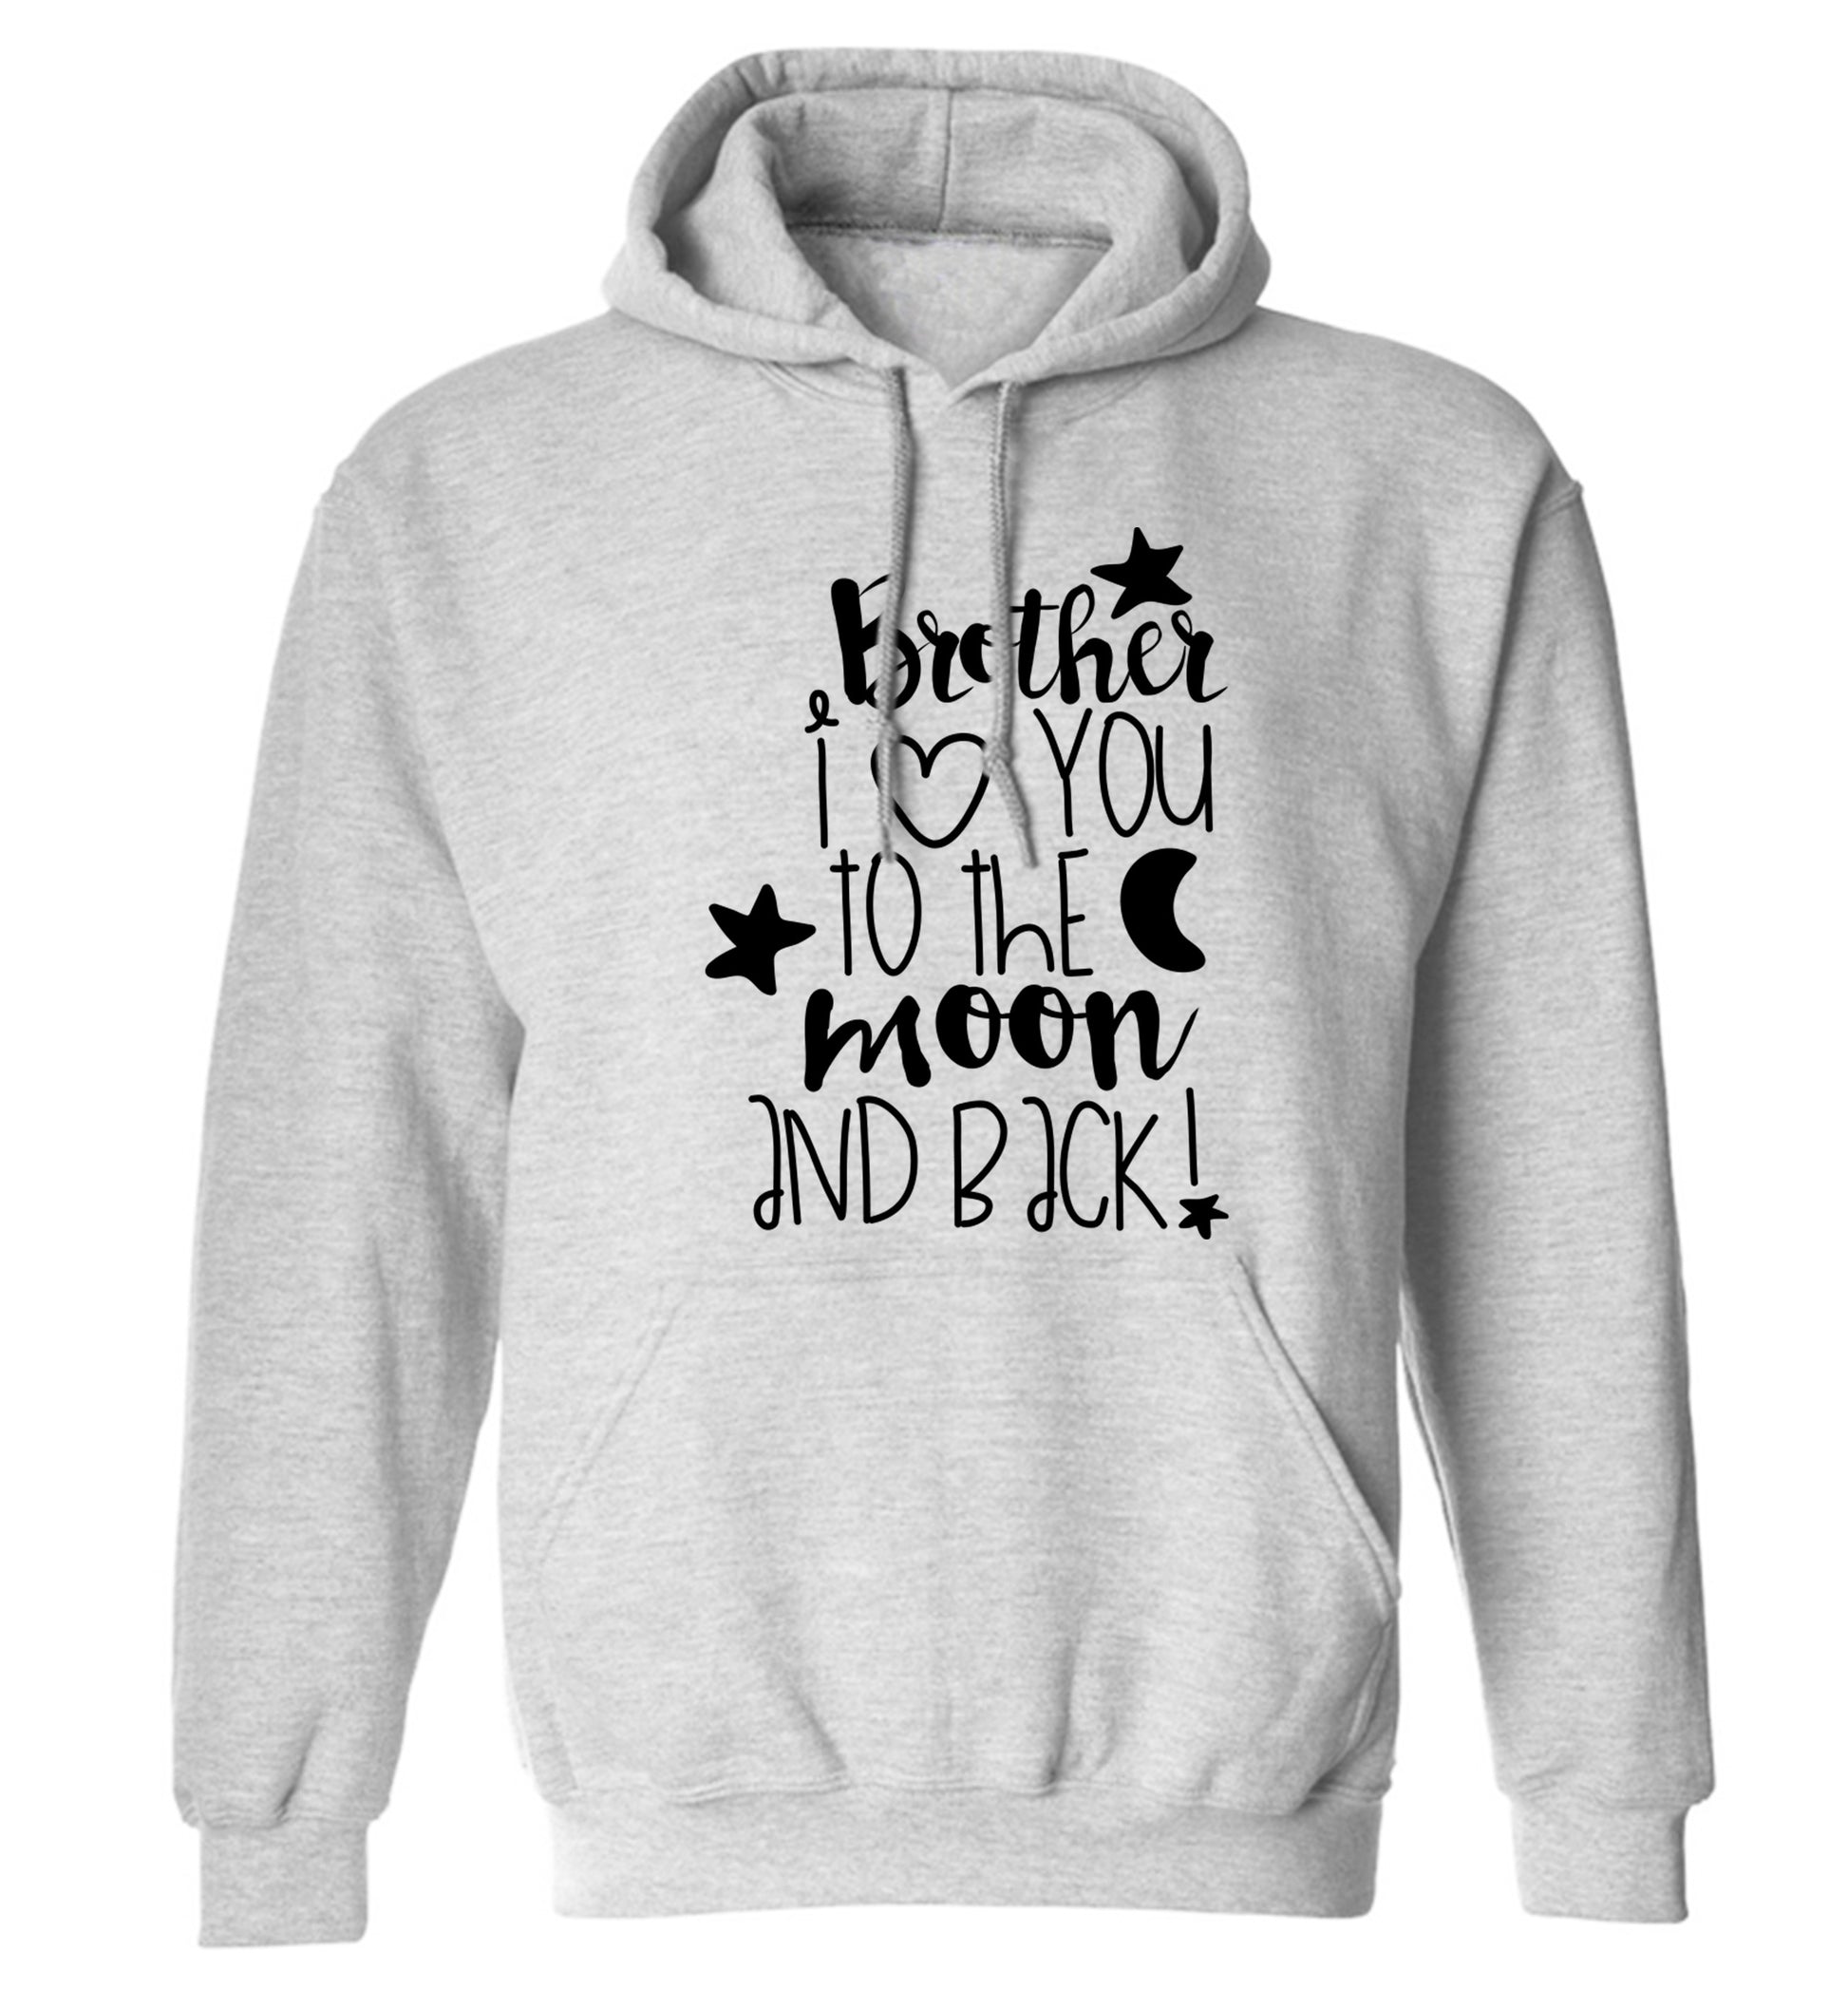 Brother I love you to the moon and back adults unisex grey hoodie 2XL